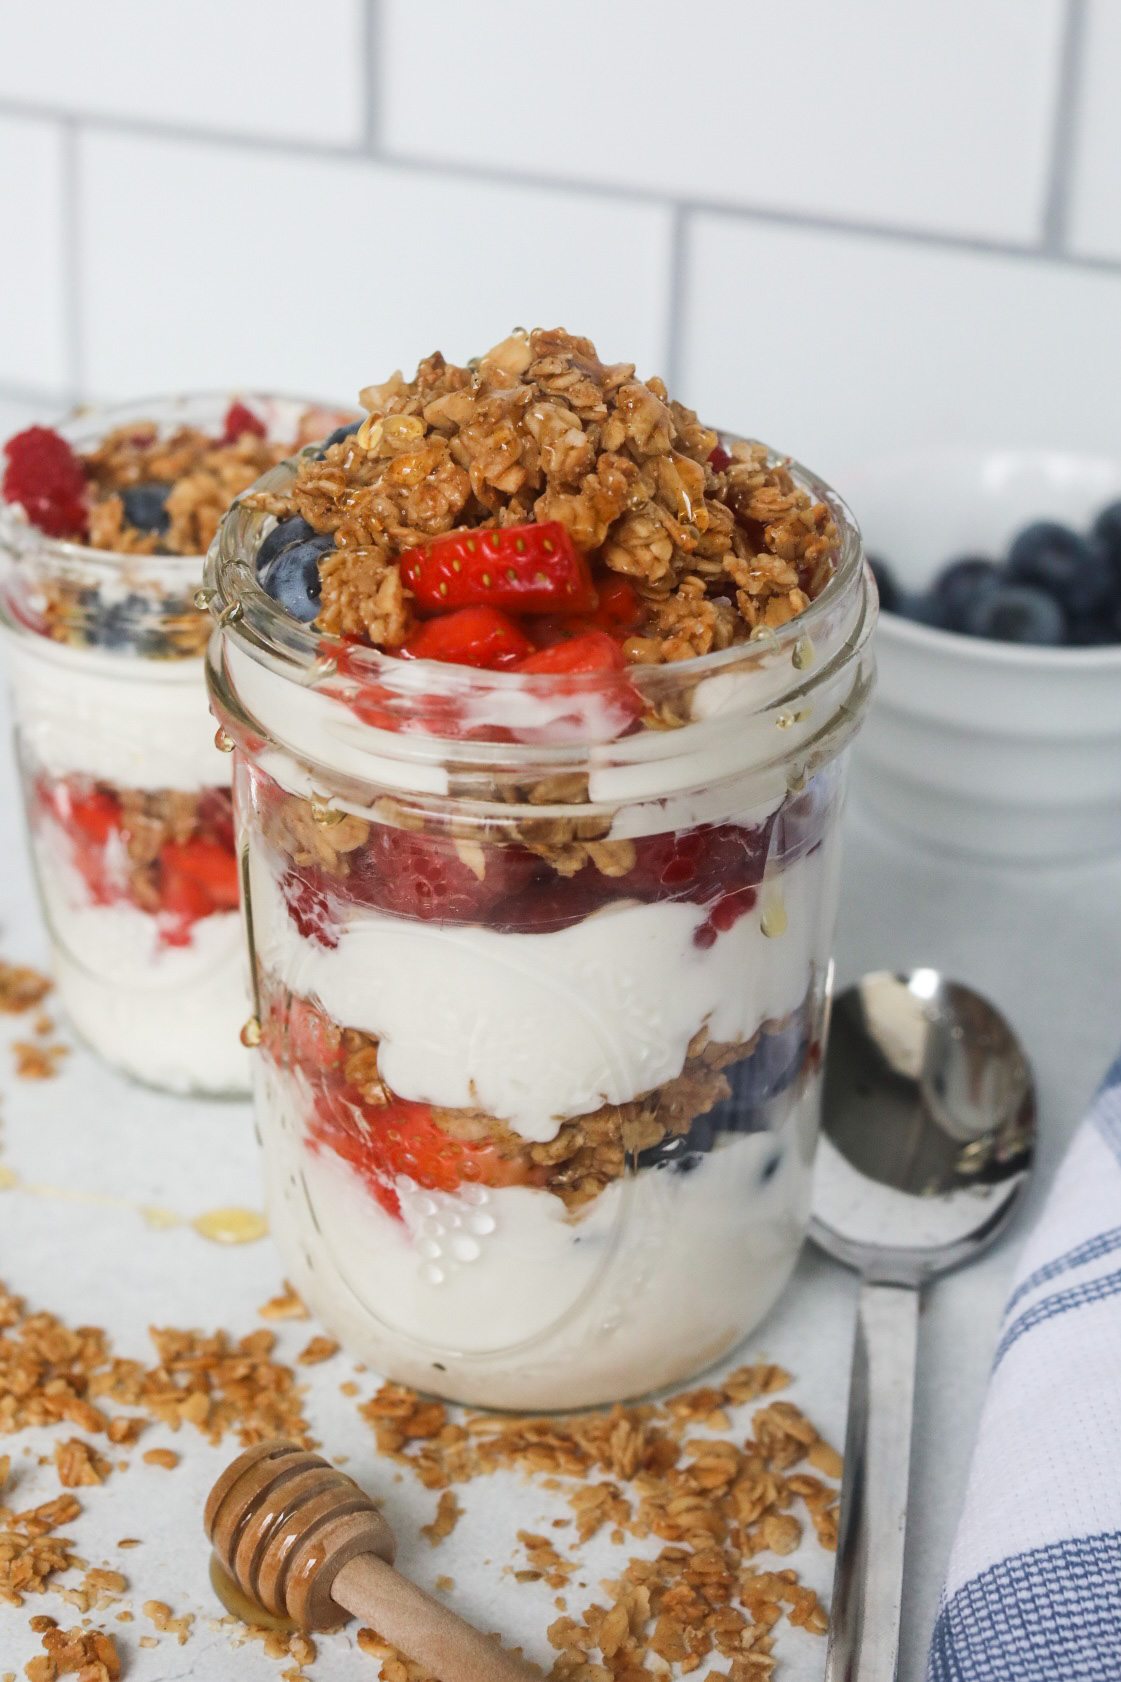 Final image of plated Greek Yogurt Parfait with fresh fruit, granola and honey drizzle. Honey stick, extra granola and spoon added for styling purposes.